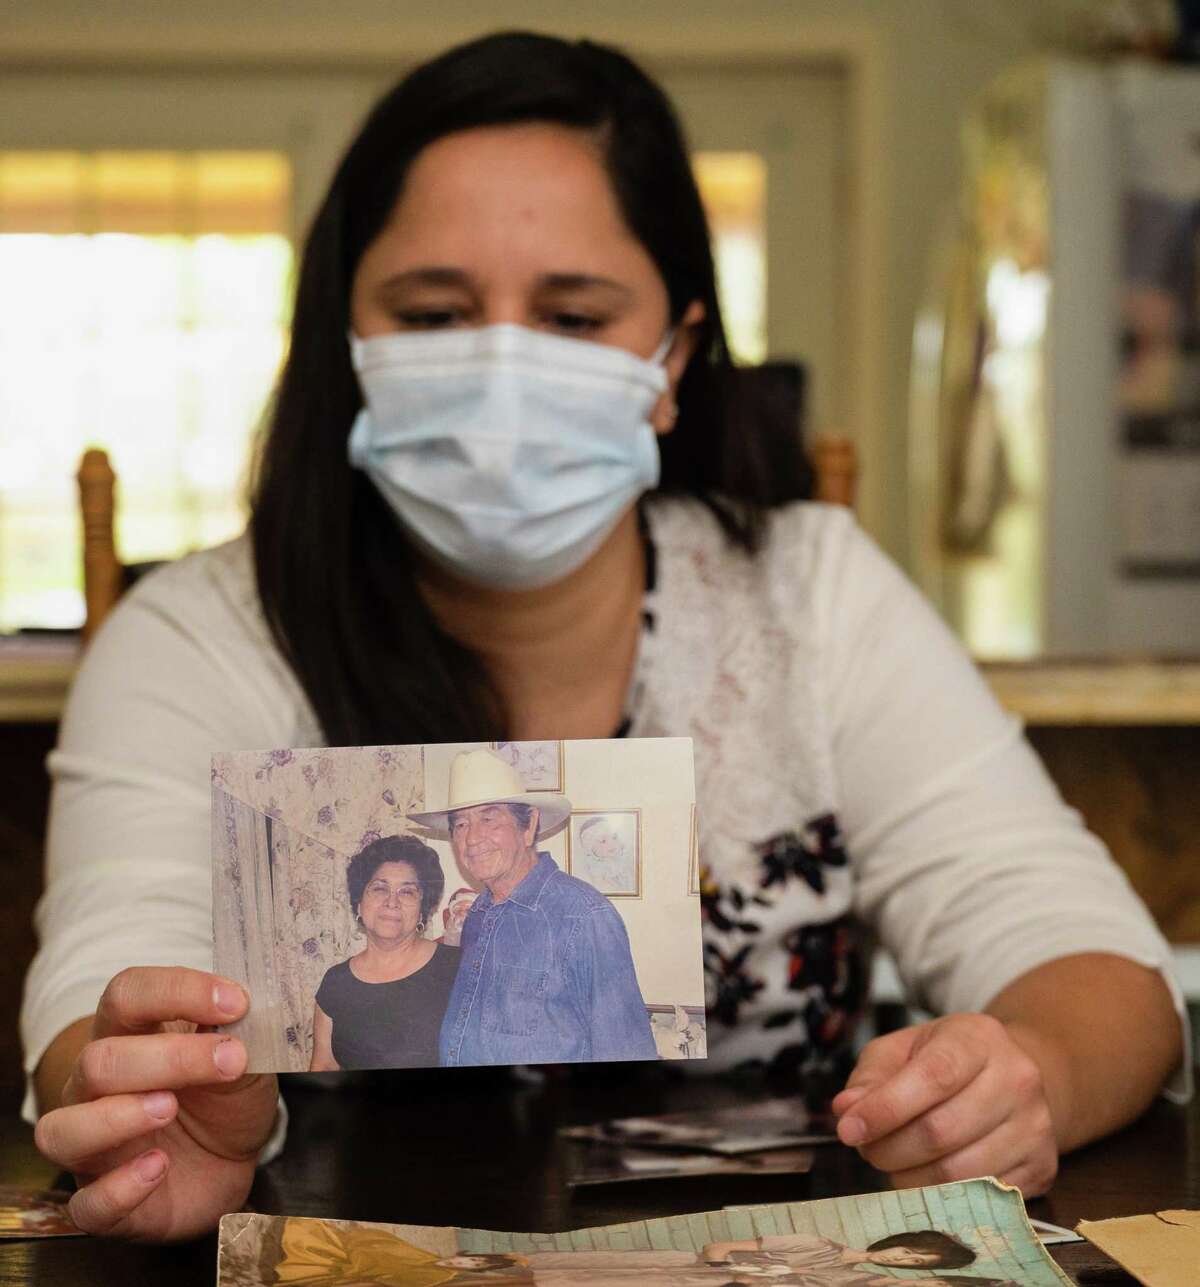 Erika Gonzalez holds a picture of her parents, Augustina and Juan Gonzalez. Both suffered from Alzheimer’s, a devastating disease which can lead to significant memory problems.